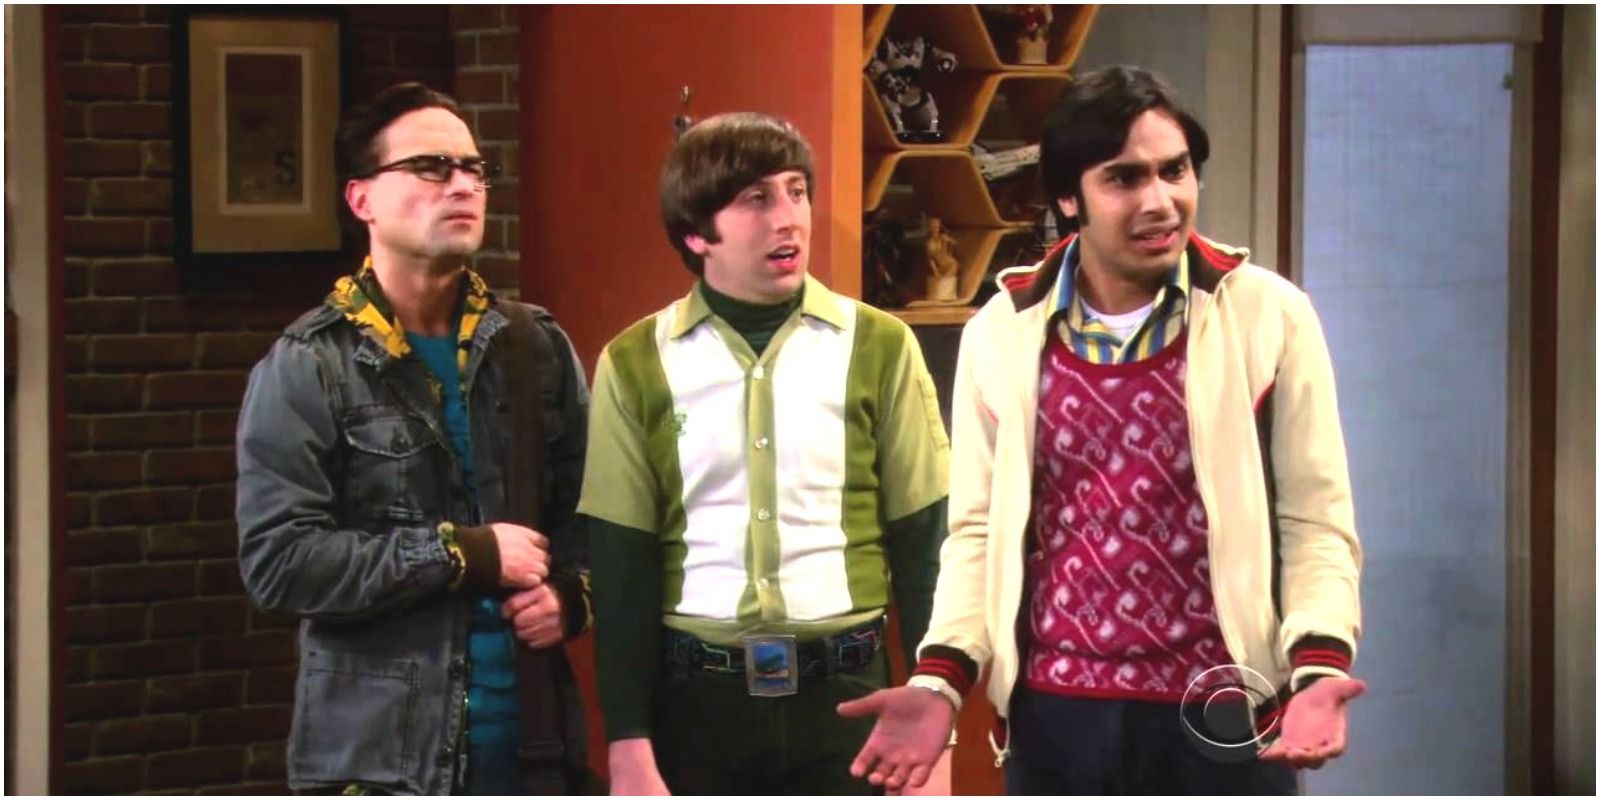 Howard, Leonard and Raj during Halo Night but with dirty Dr. Plimpton from the Big Bang Theory